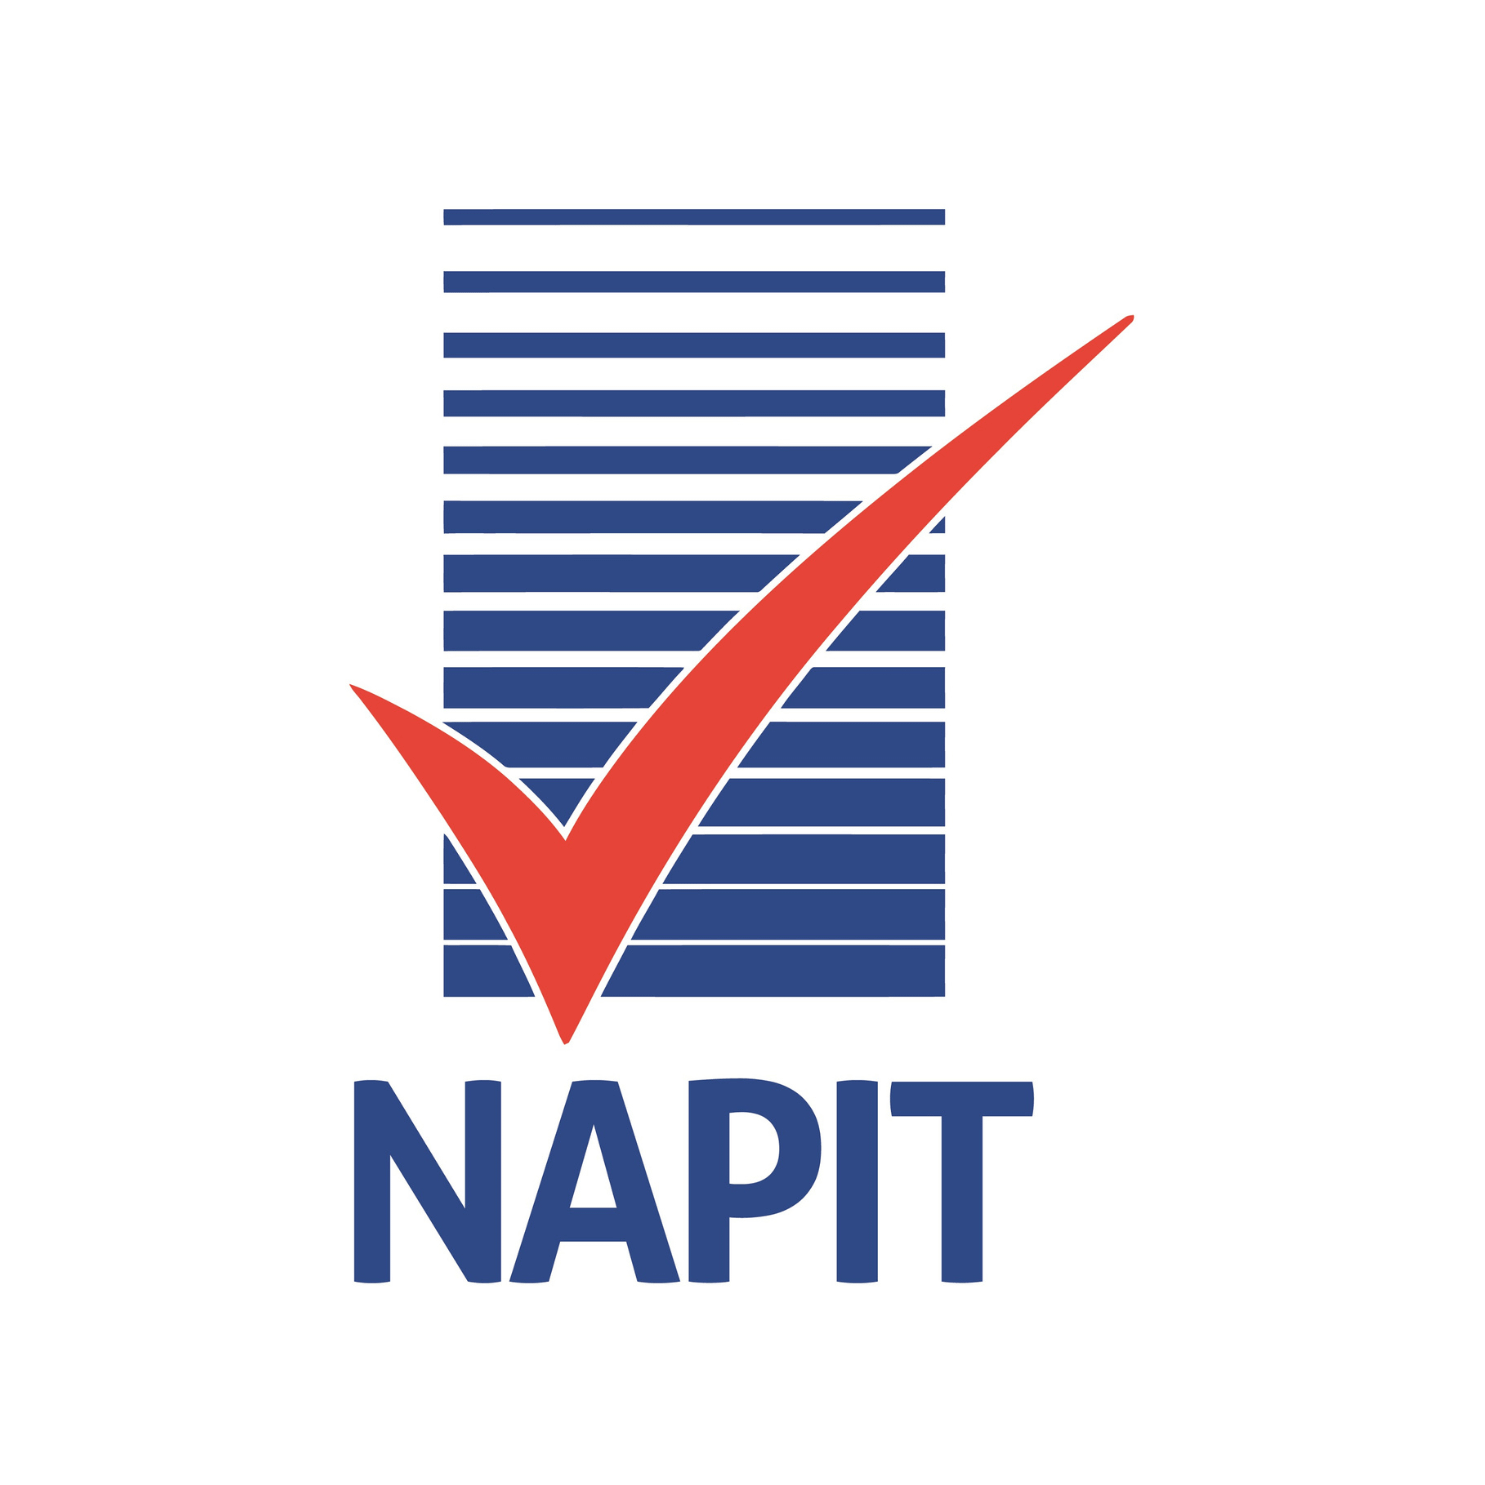 NAPIT Approved Electrician